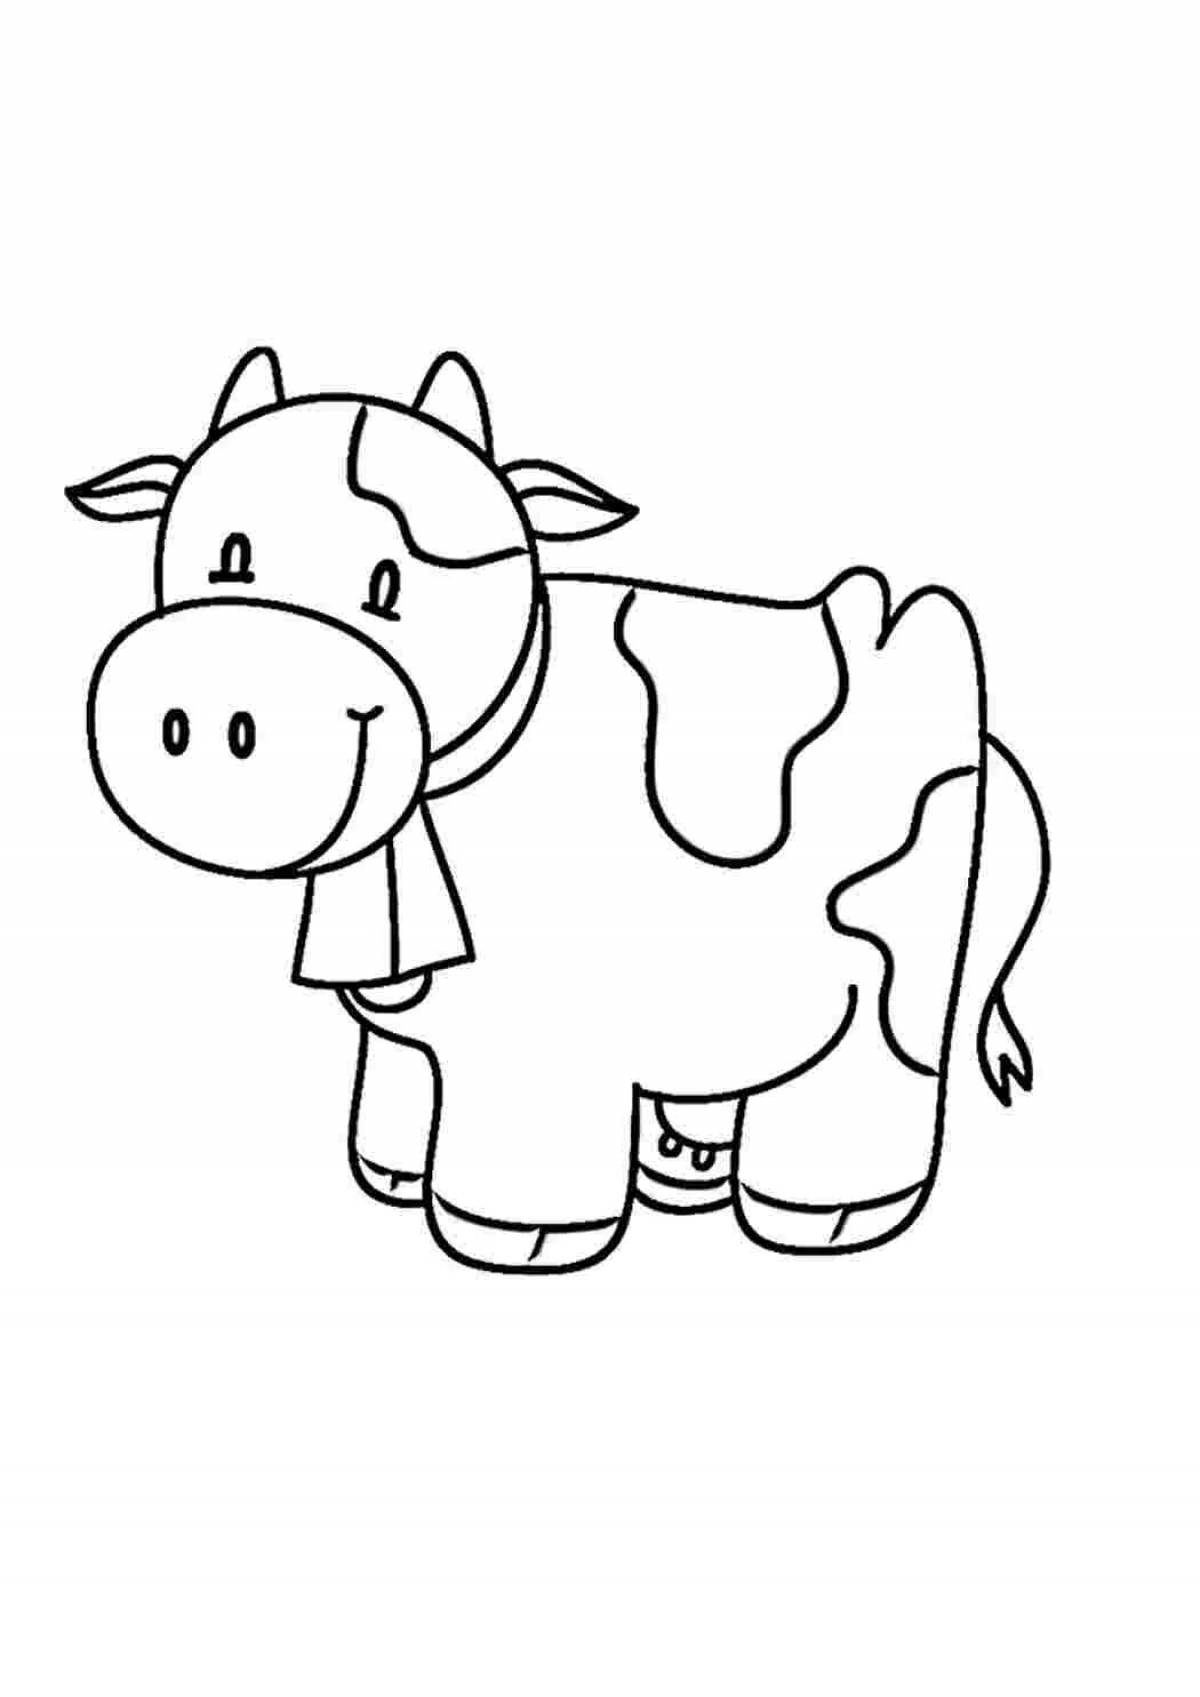 Youth coloring cow for toddlers 2 3 years old